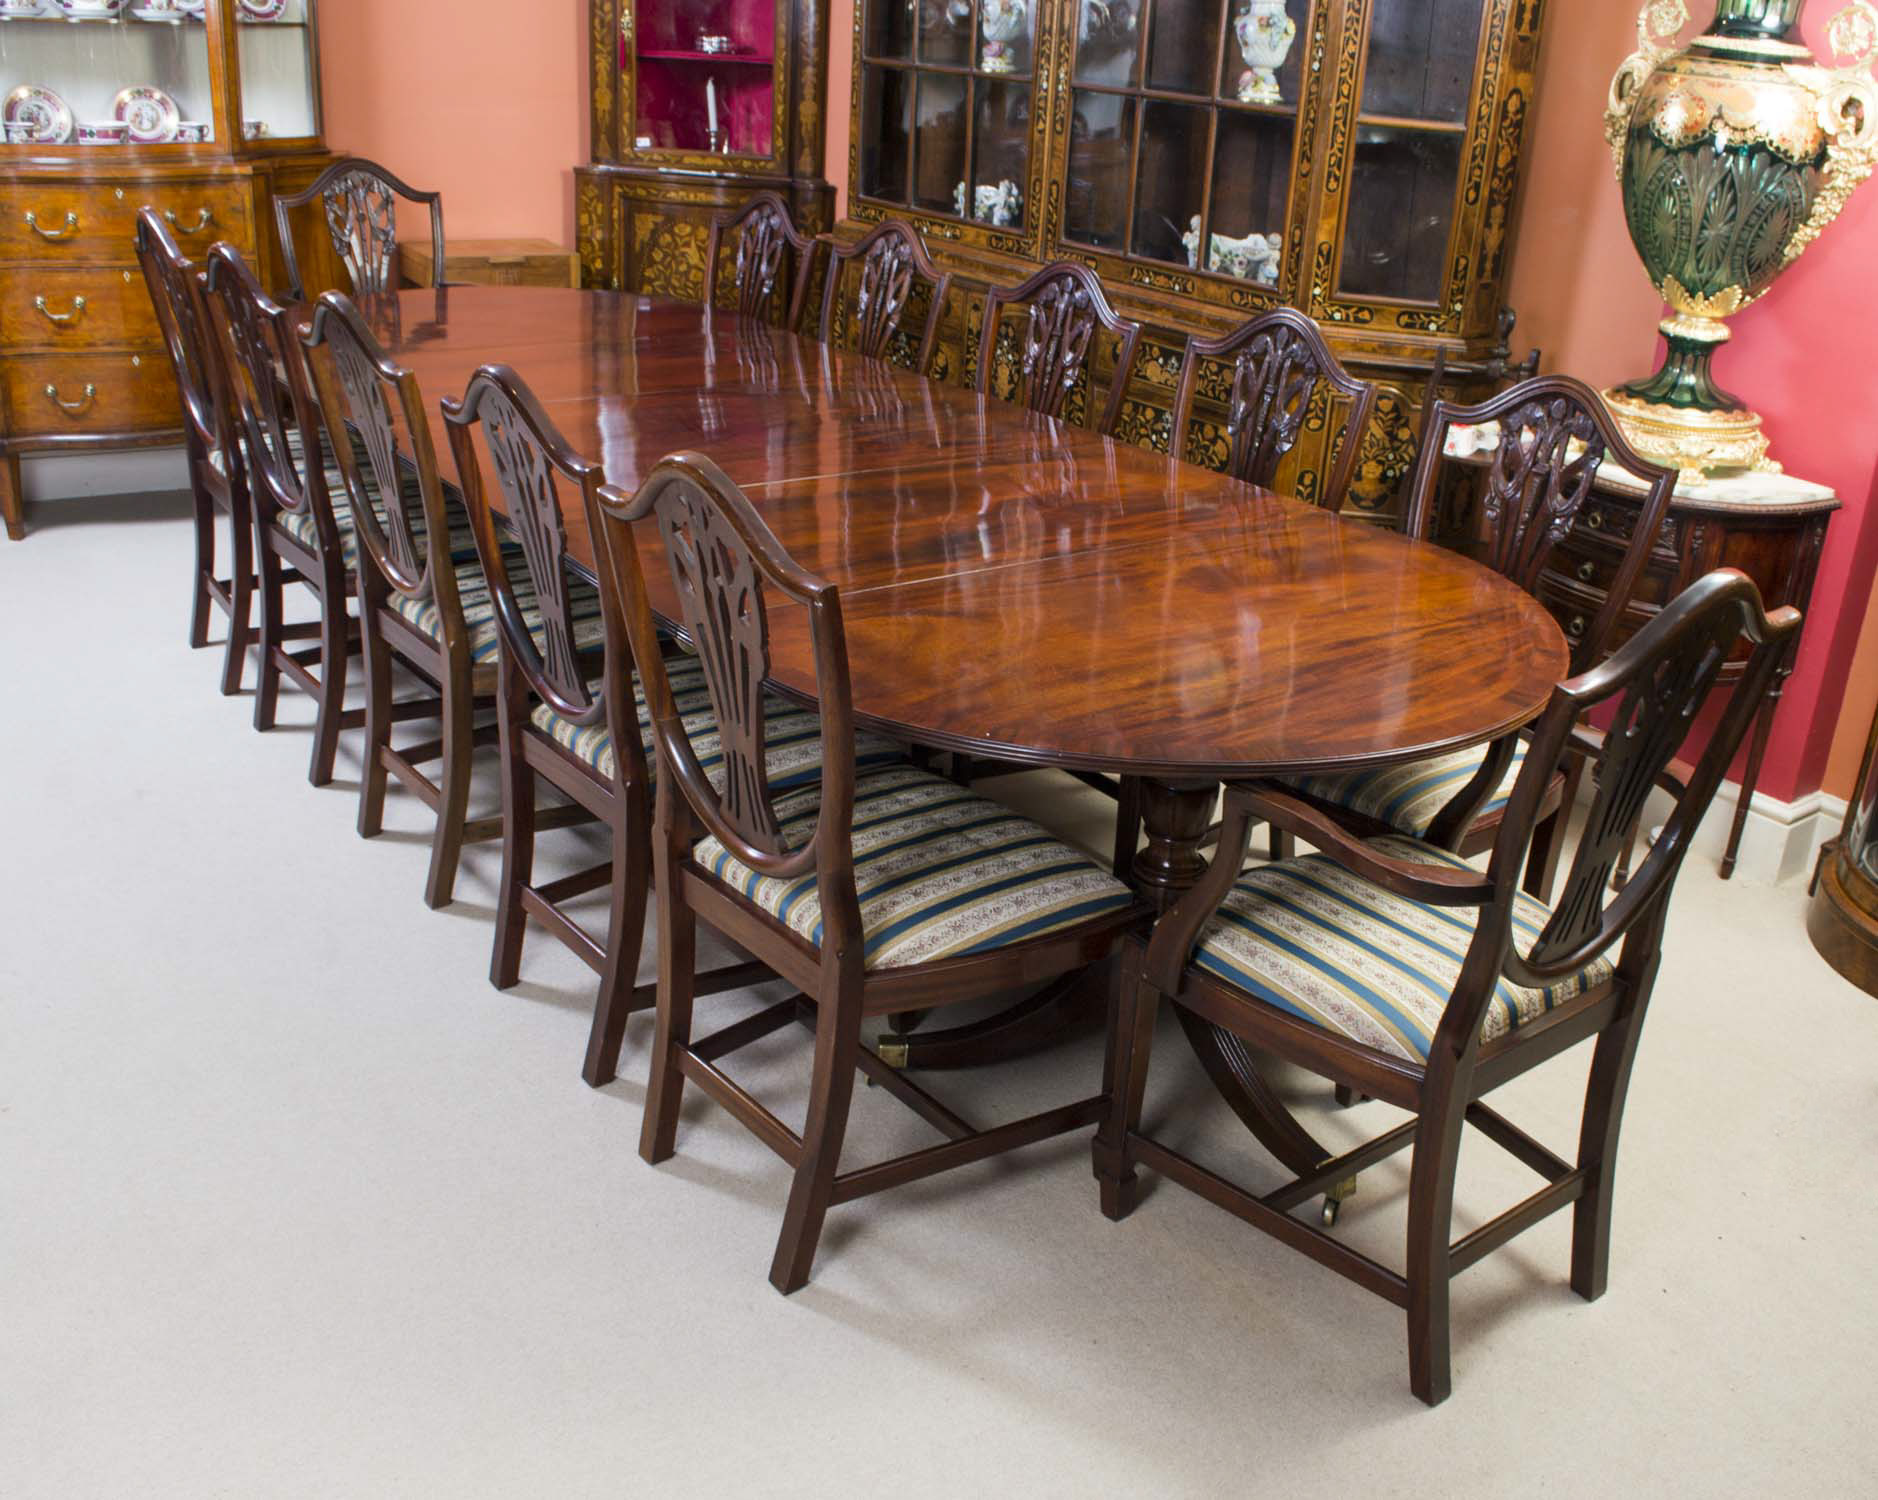 12 chair dining room set